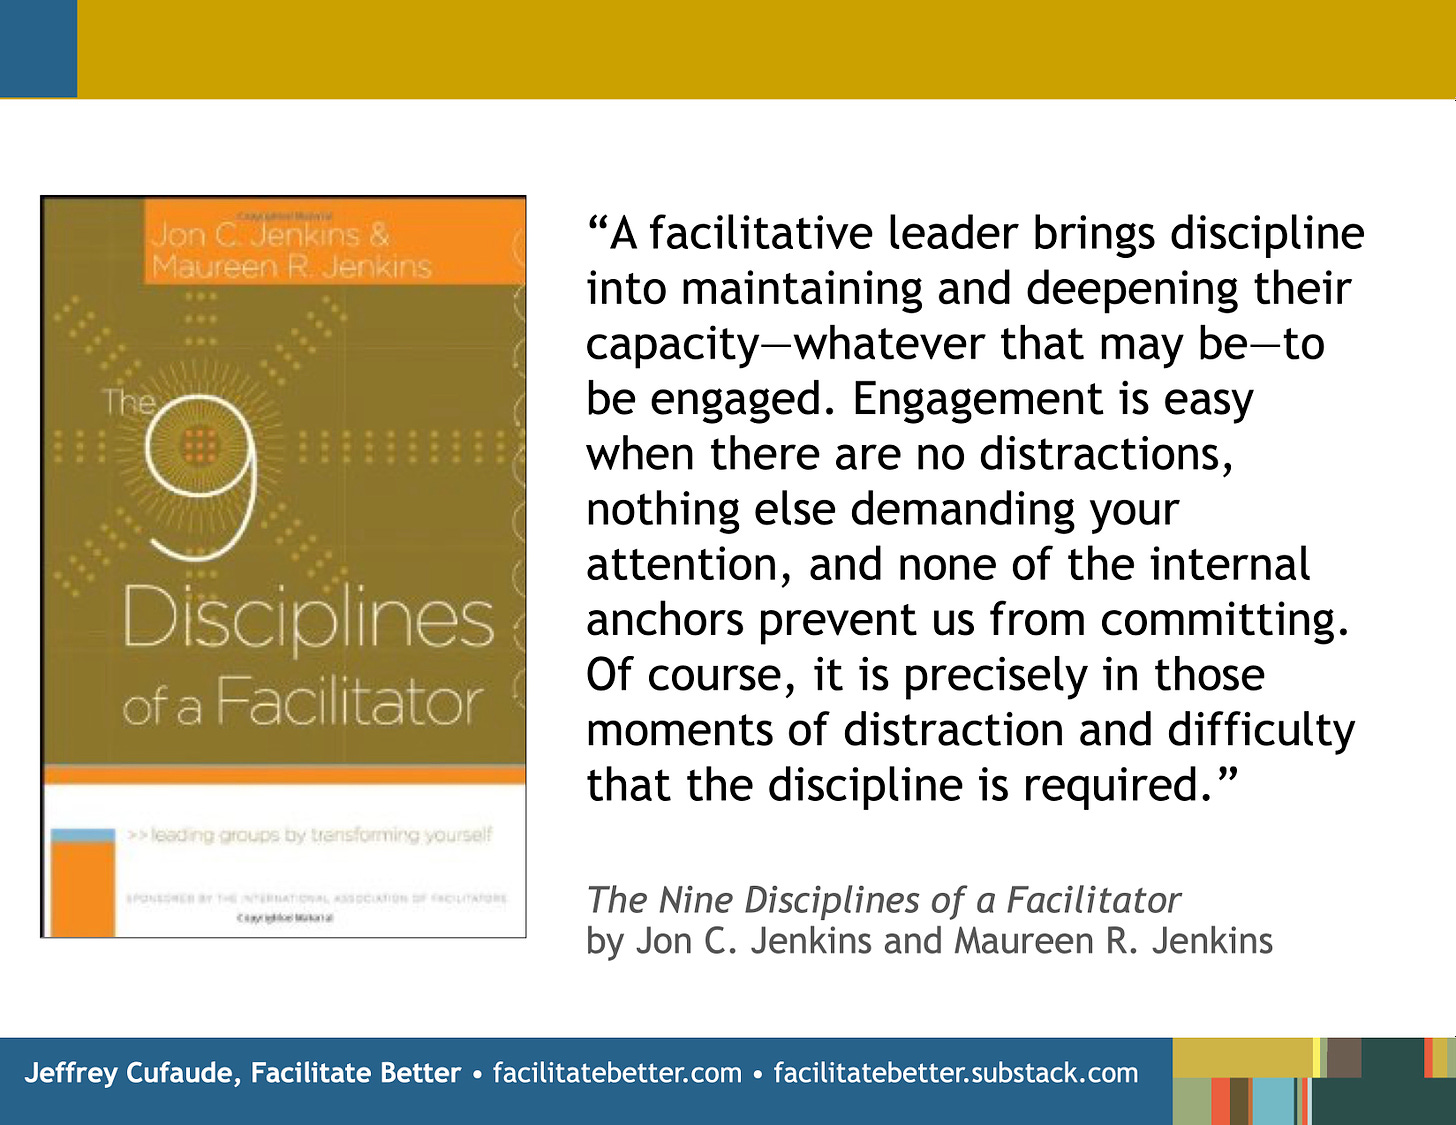 Picture of the book cover for The 9 Disciplines of a Facilitator